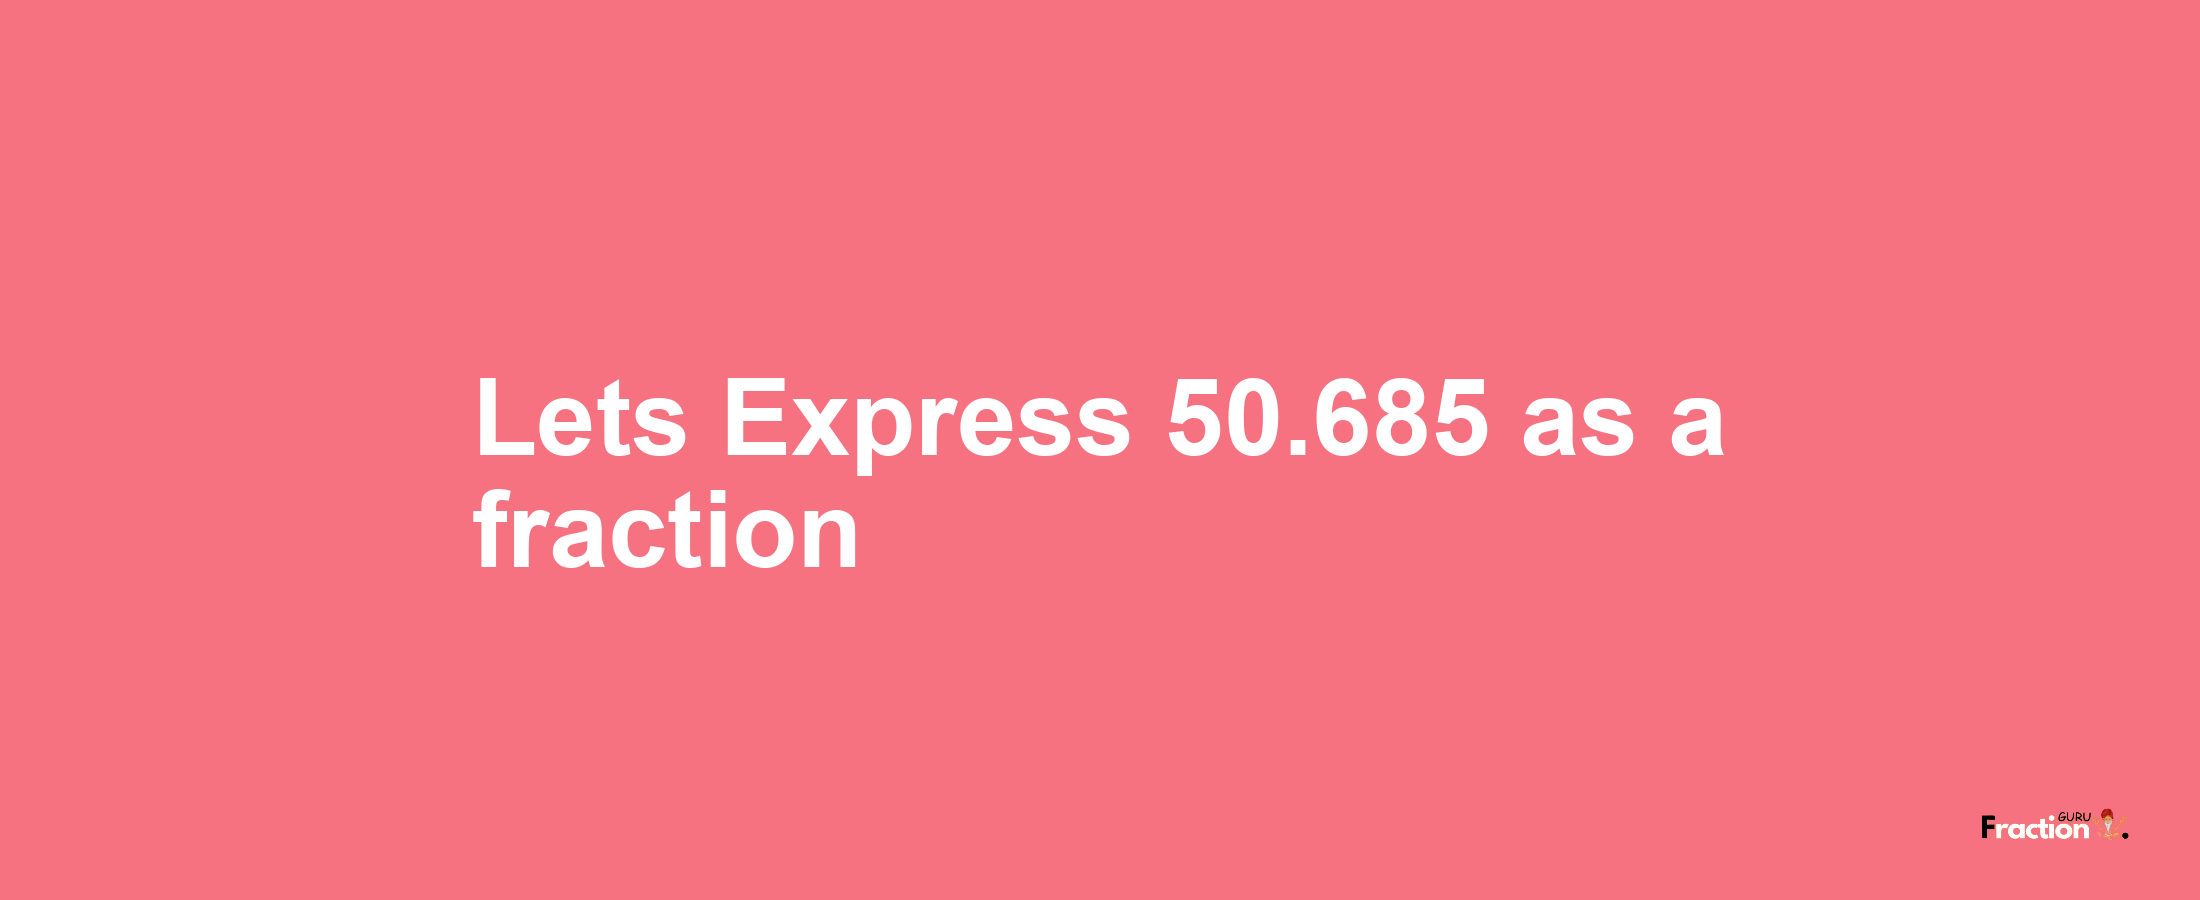 Lets Express 50.685 as afraction